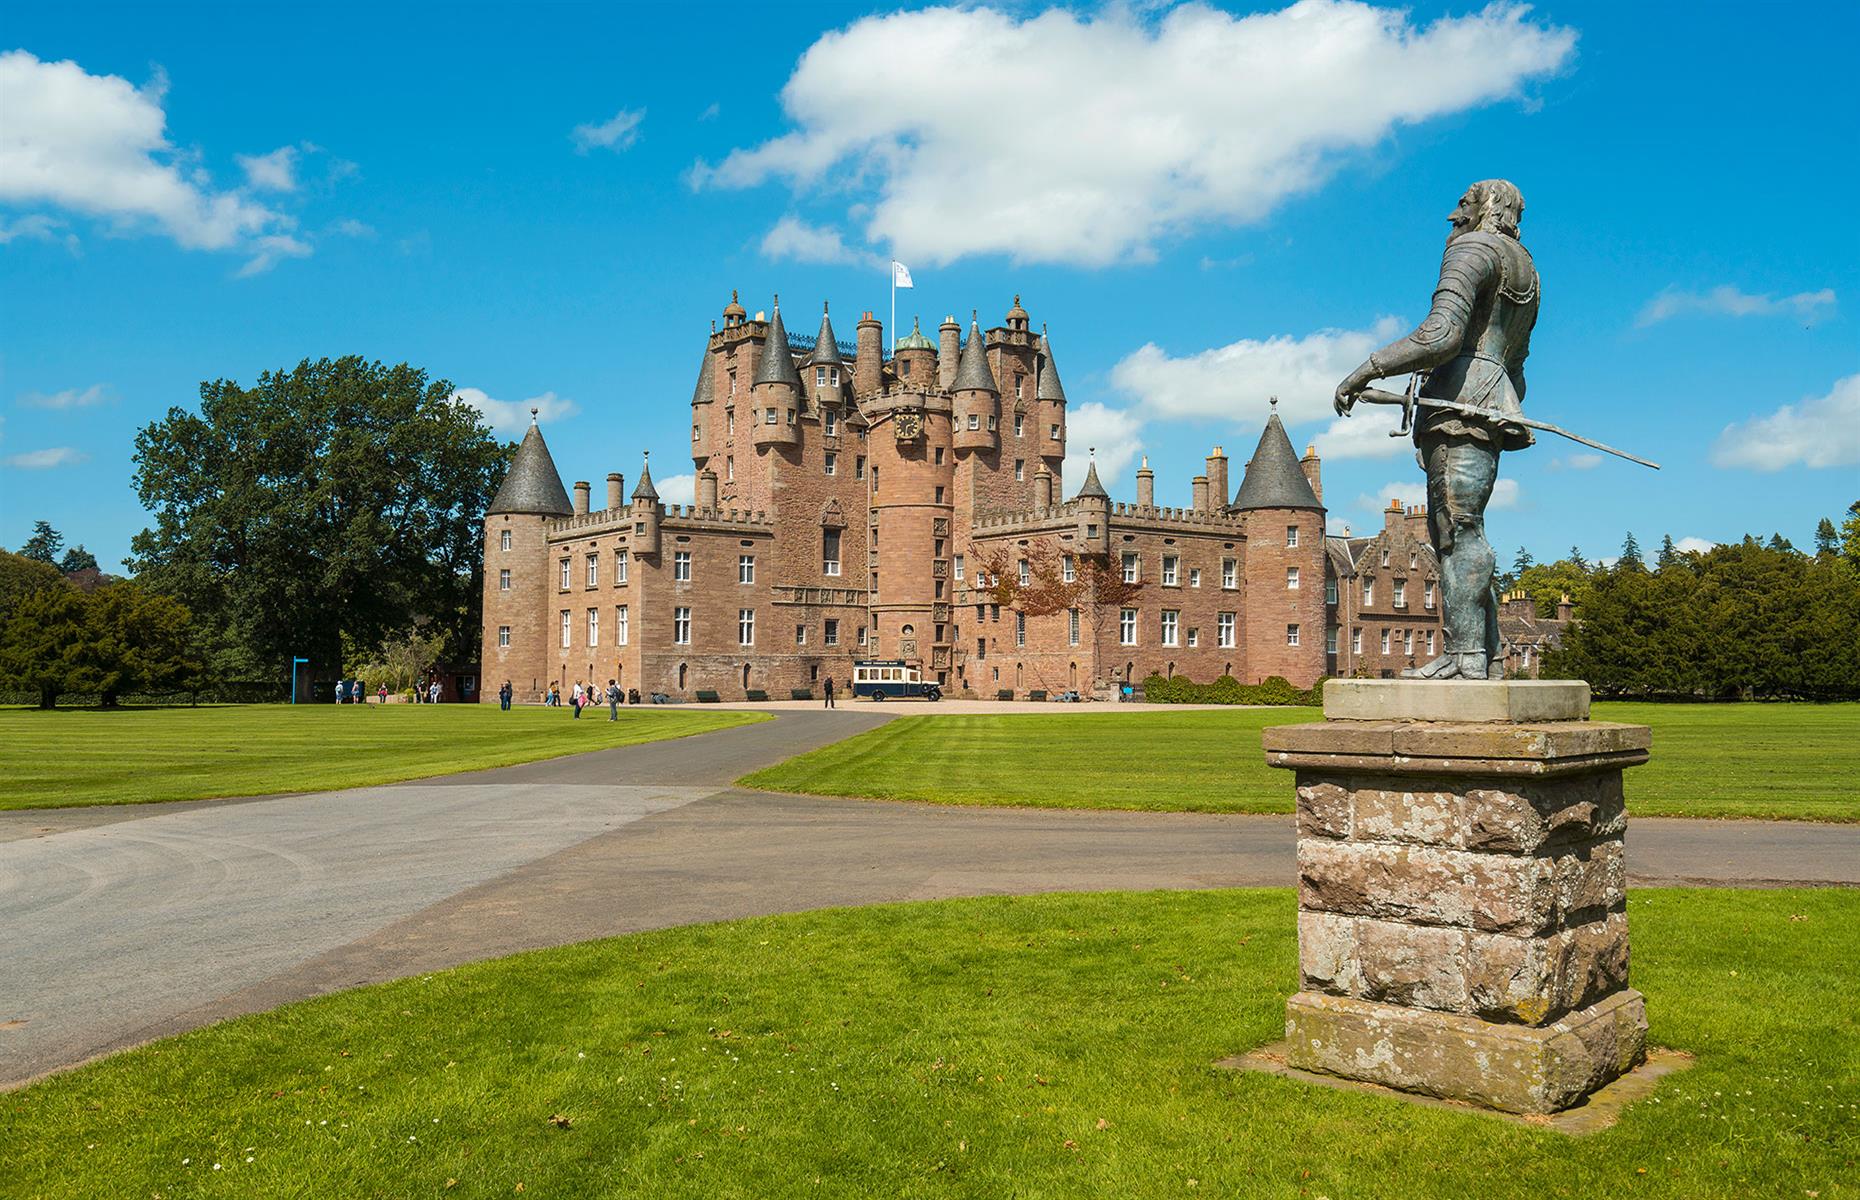 <p><a href="https://www.glamis-castle.co.uk/">Glamis</a> Castle, the setting for Shakespeare's <em>Macbeth, </em>has long been associated with the Bard, and the castle has even created a Shakespeare trail in the grounds, inspired by the 'Thane of Glamis' in the play. The playwright aside, with a redbrick exterior and Scottish Baronial architecture, Glamis, which was also the childhood home of The Queen Mother, is about as close to the epitome of a Scottish castle as you can get.</p>